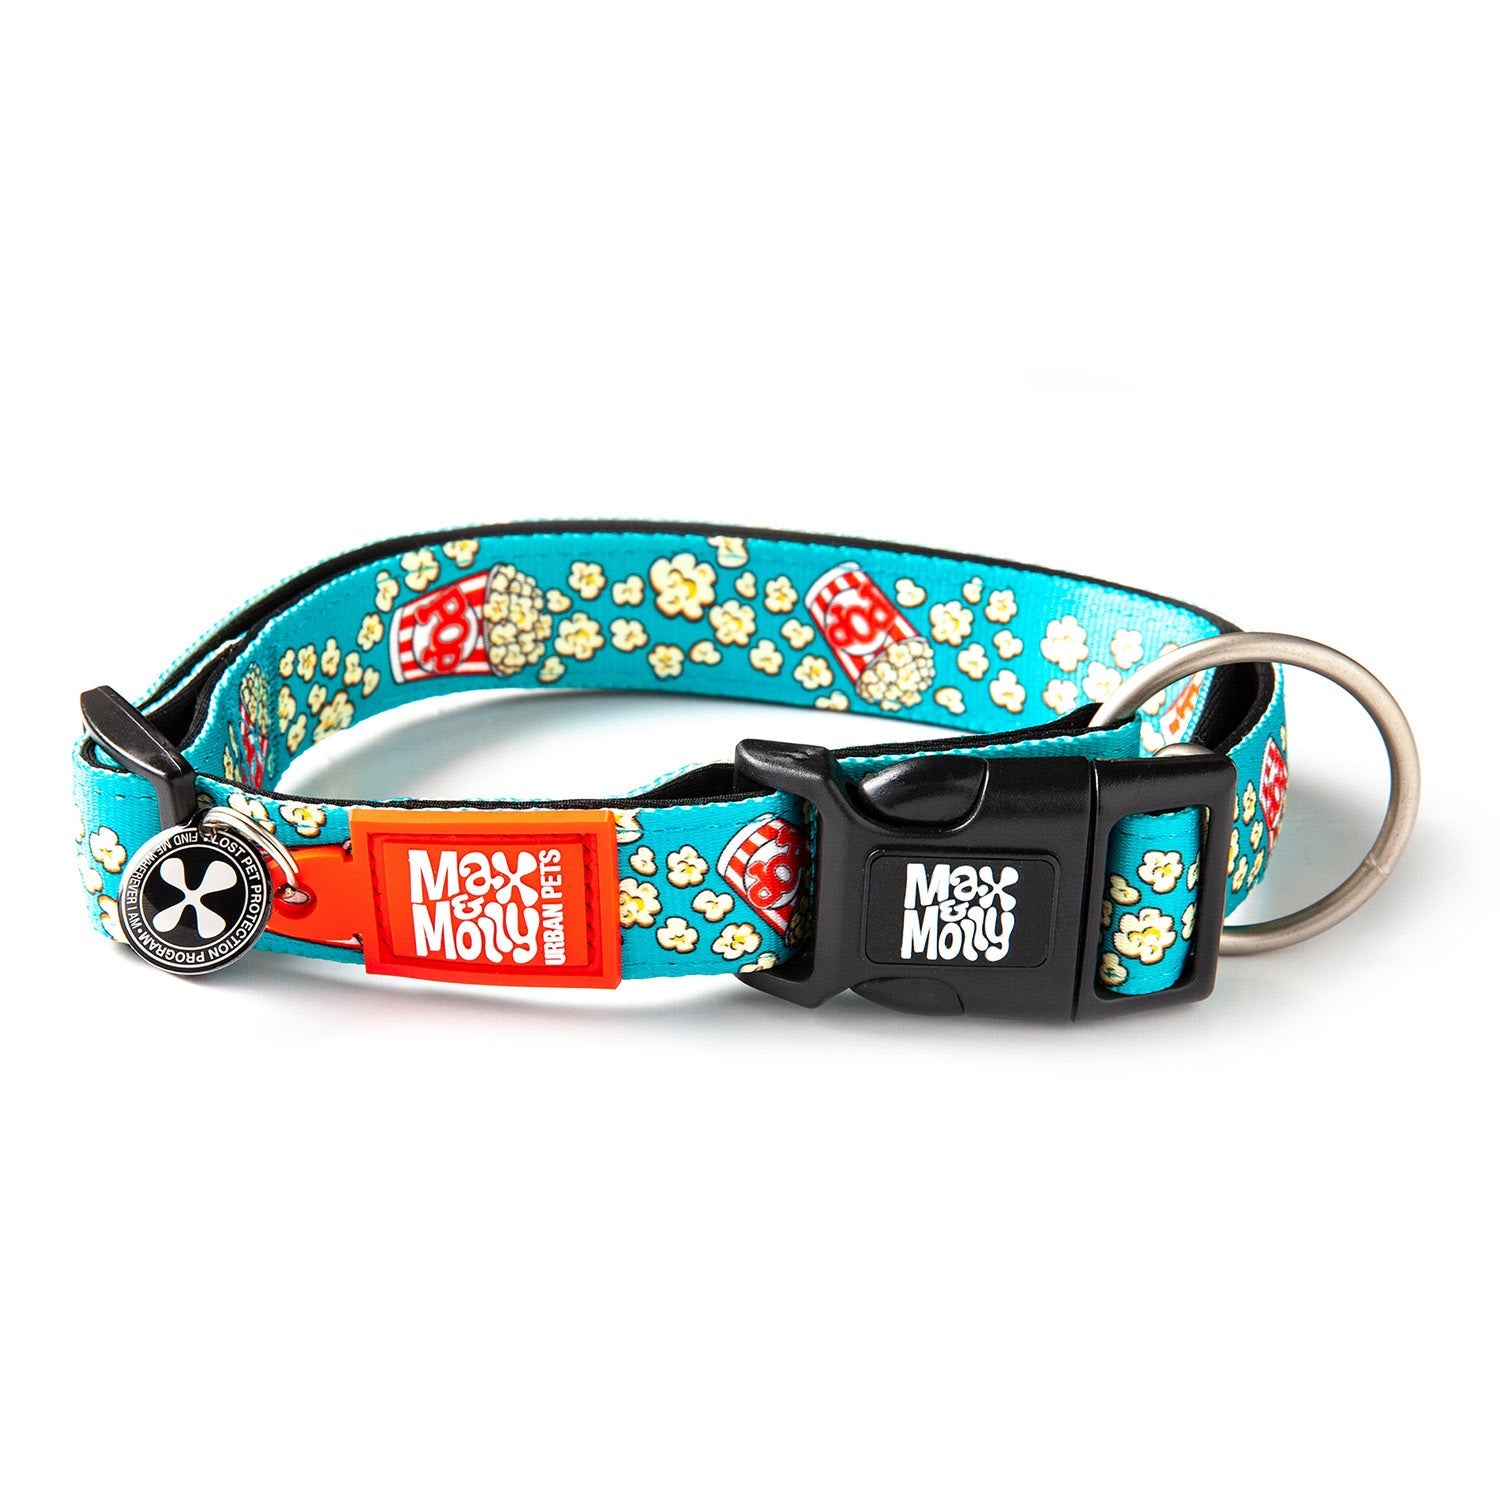 Max & Molly Smart ID Dog Collar - Popcorn - Pets and More